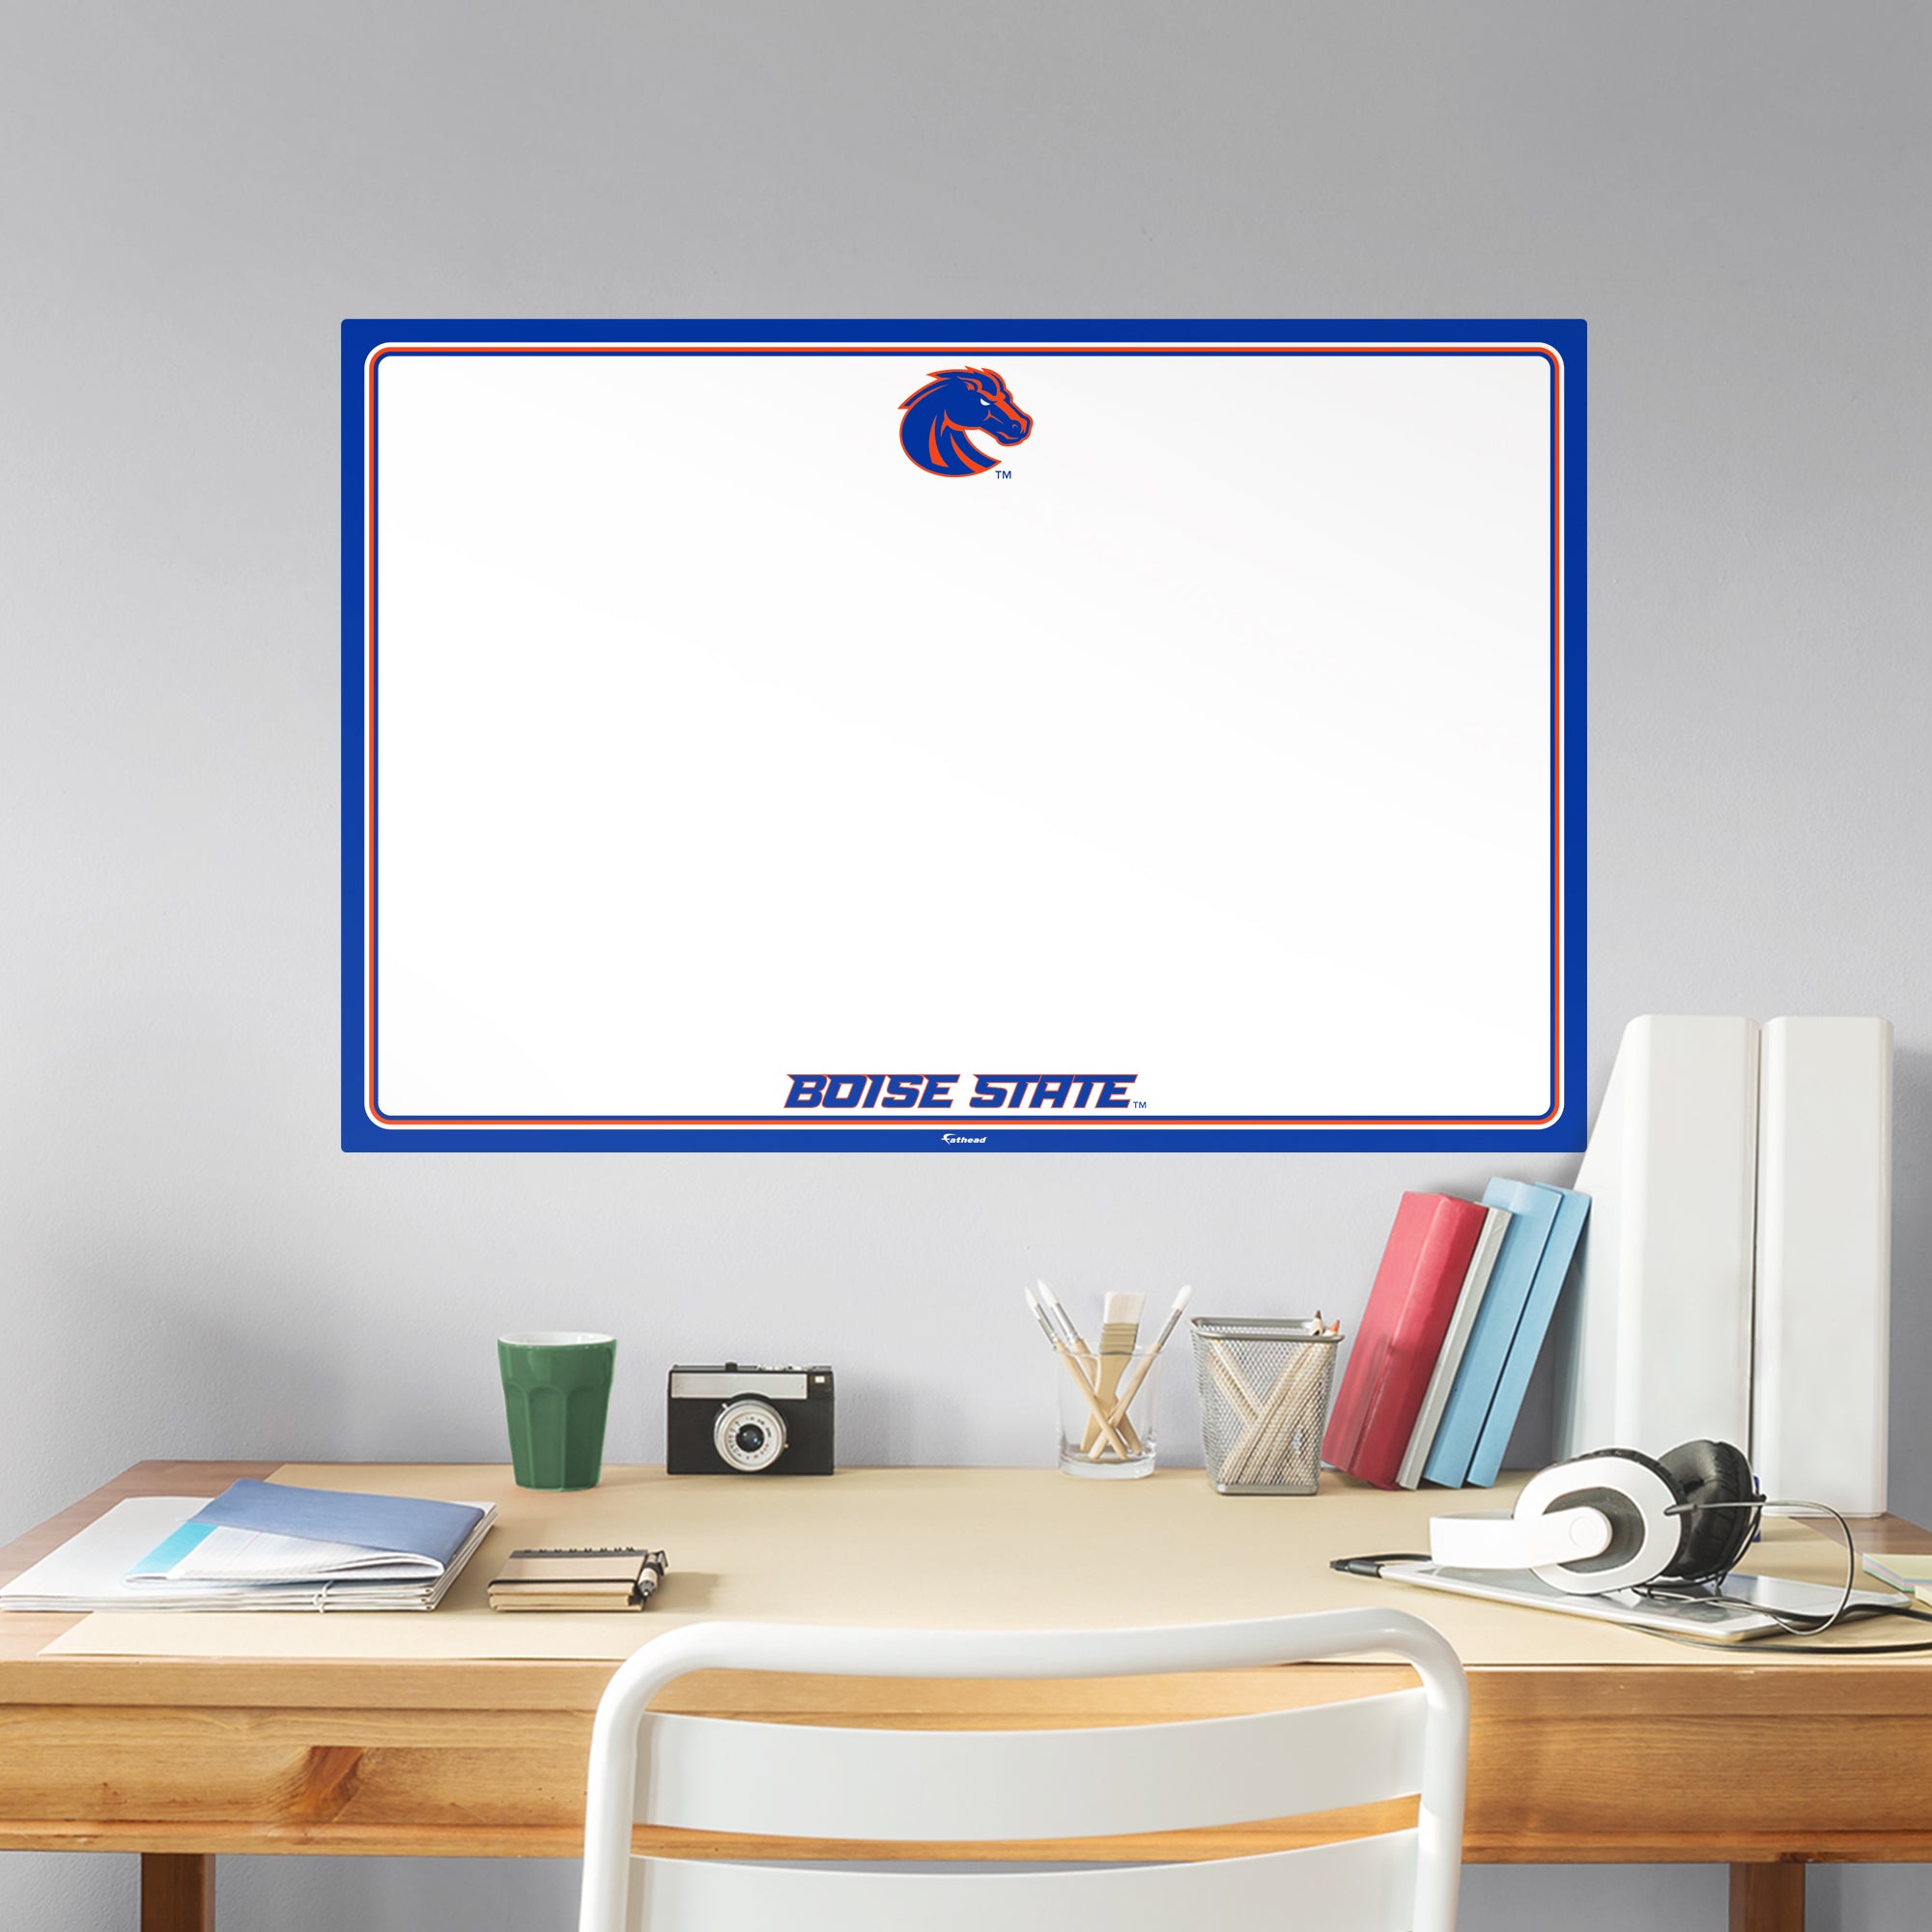 Boise State Broncos: Dry Erase Whiteboard - X-Large Officially Licensed NCAA Removable Wall Decal XL by Fathead | Vinyl